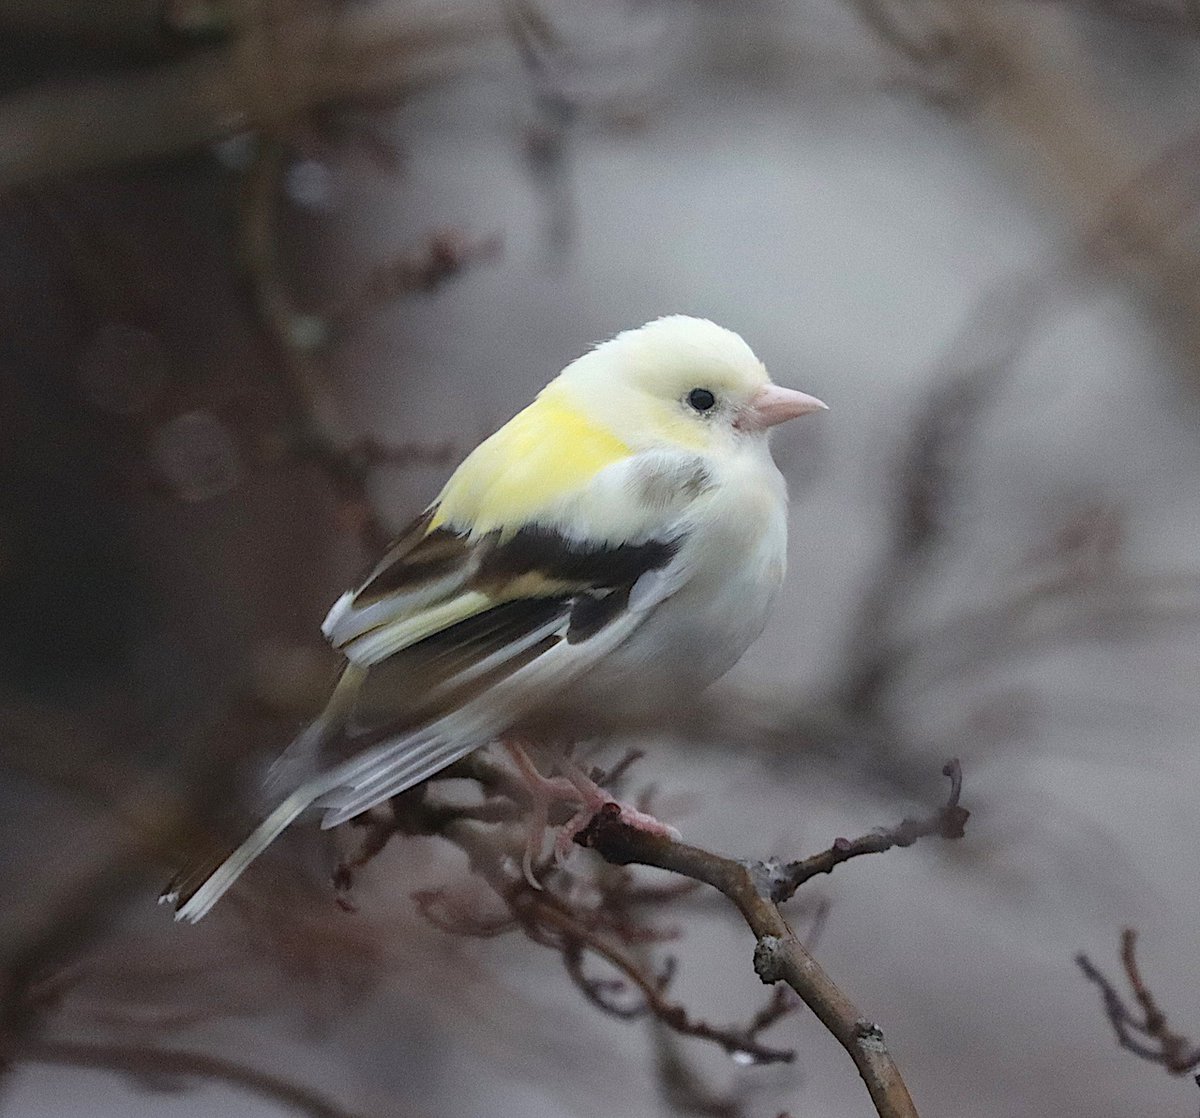 Have glimpsed this Leucistic Chaffinch around the village over the past month- it came into my window feeders today. #Leucism #Ullapool #Highlandbirds